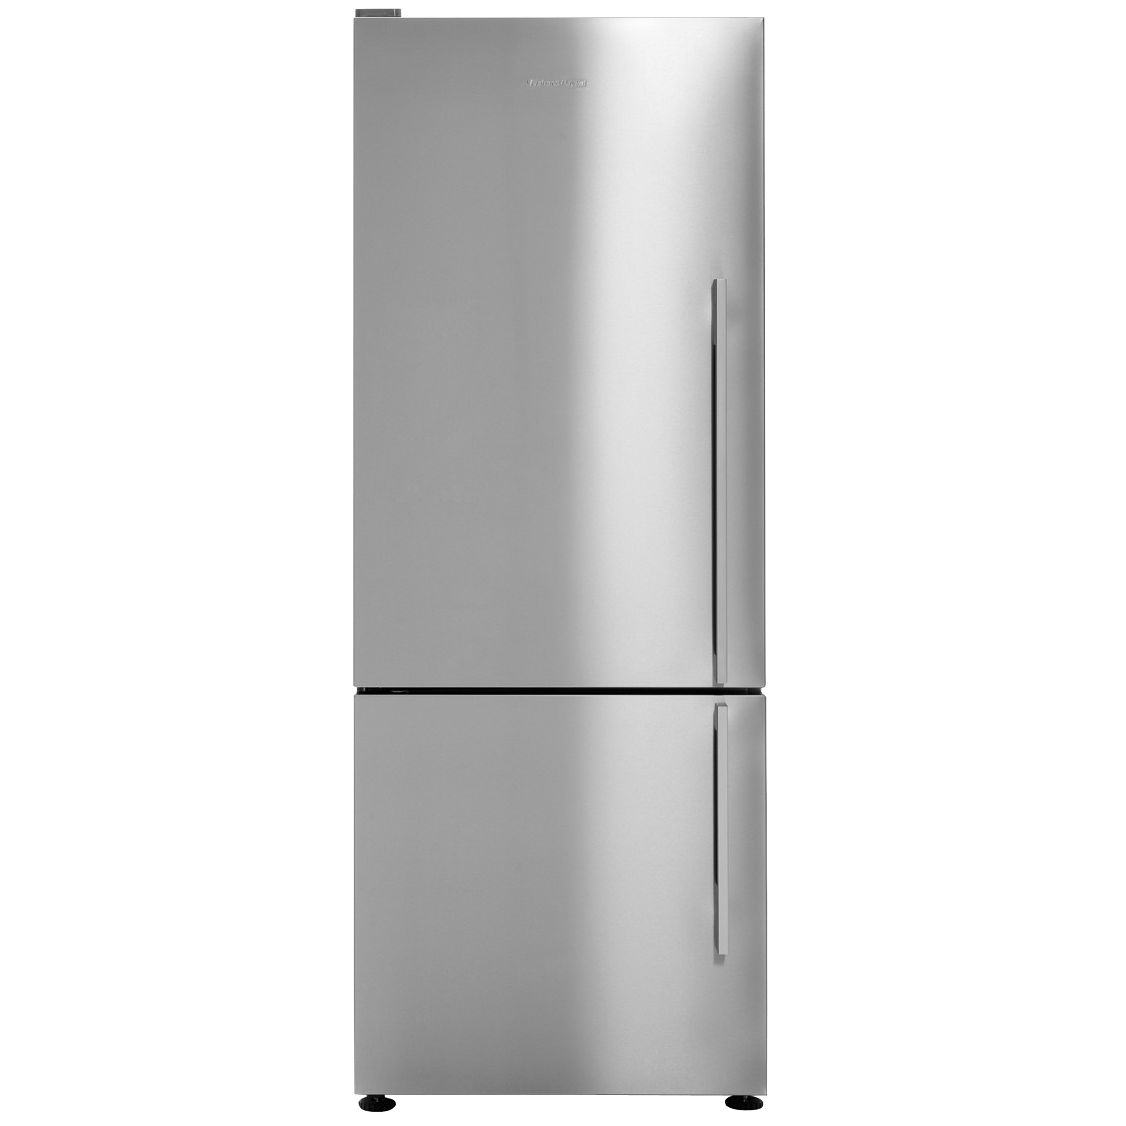 Fisher & Paykel E402BLXFD Fridge Freezer, Stainless Steel Review thumbnail